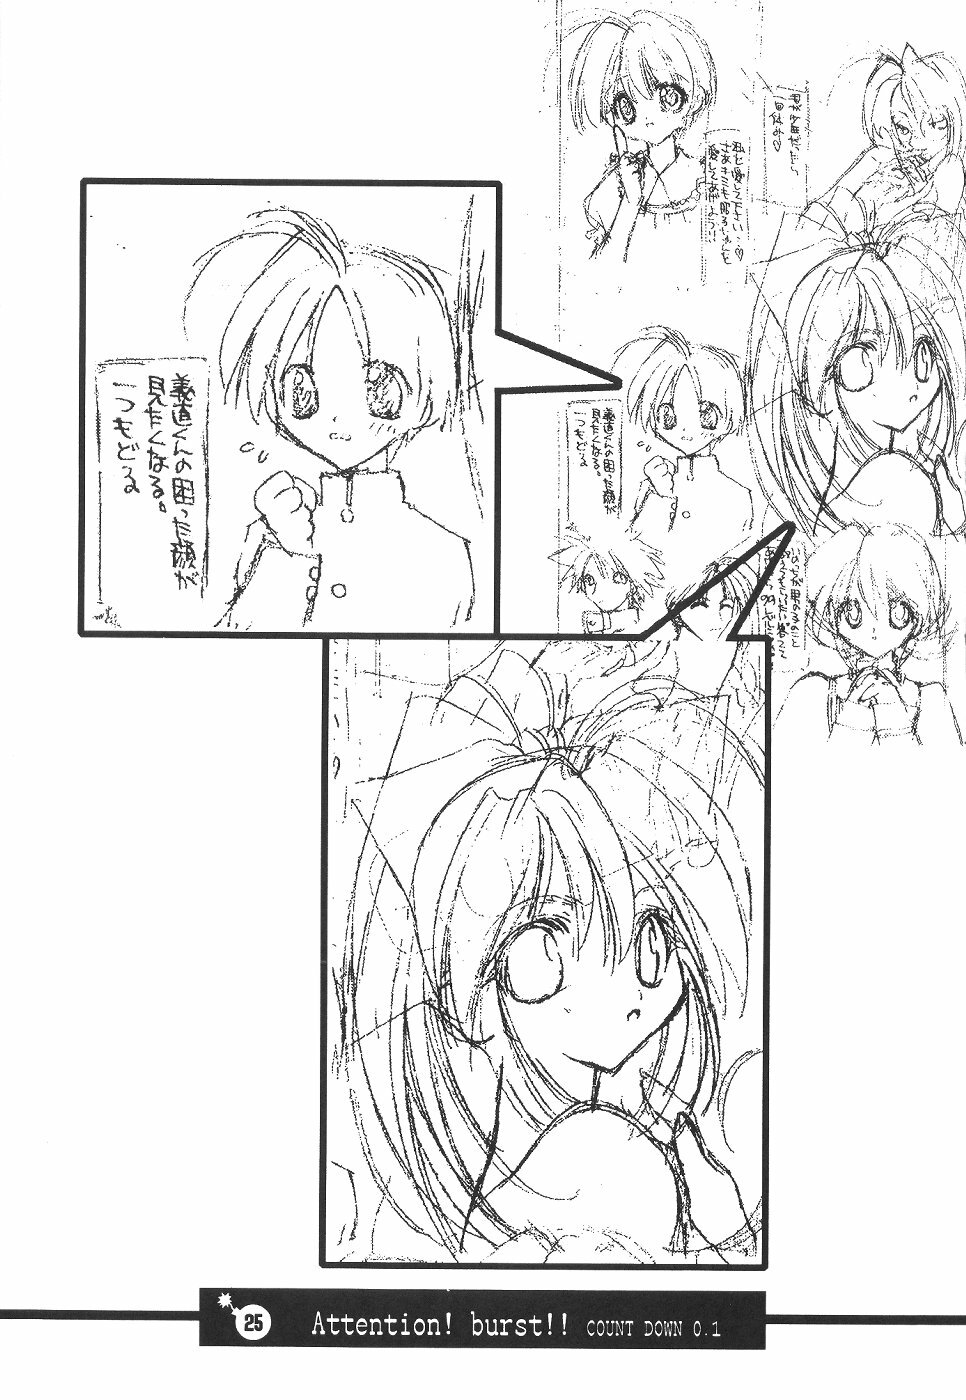 (C61) [Your's Wow (Konata Hyuura)] Bakusun Attention! Burst!! Count Down 0.1 page 26 full